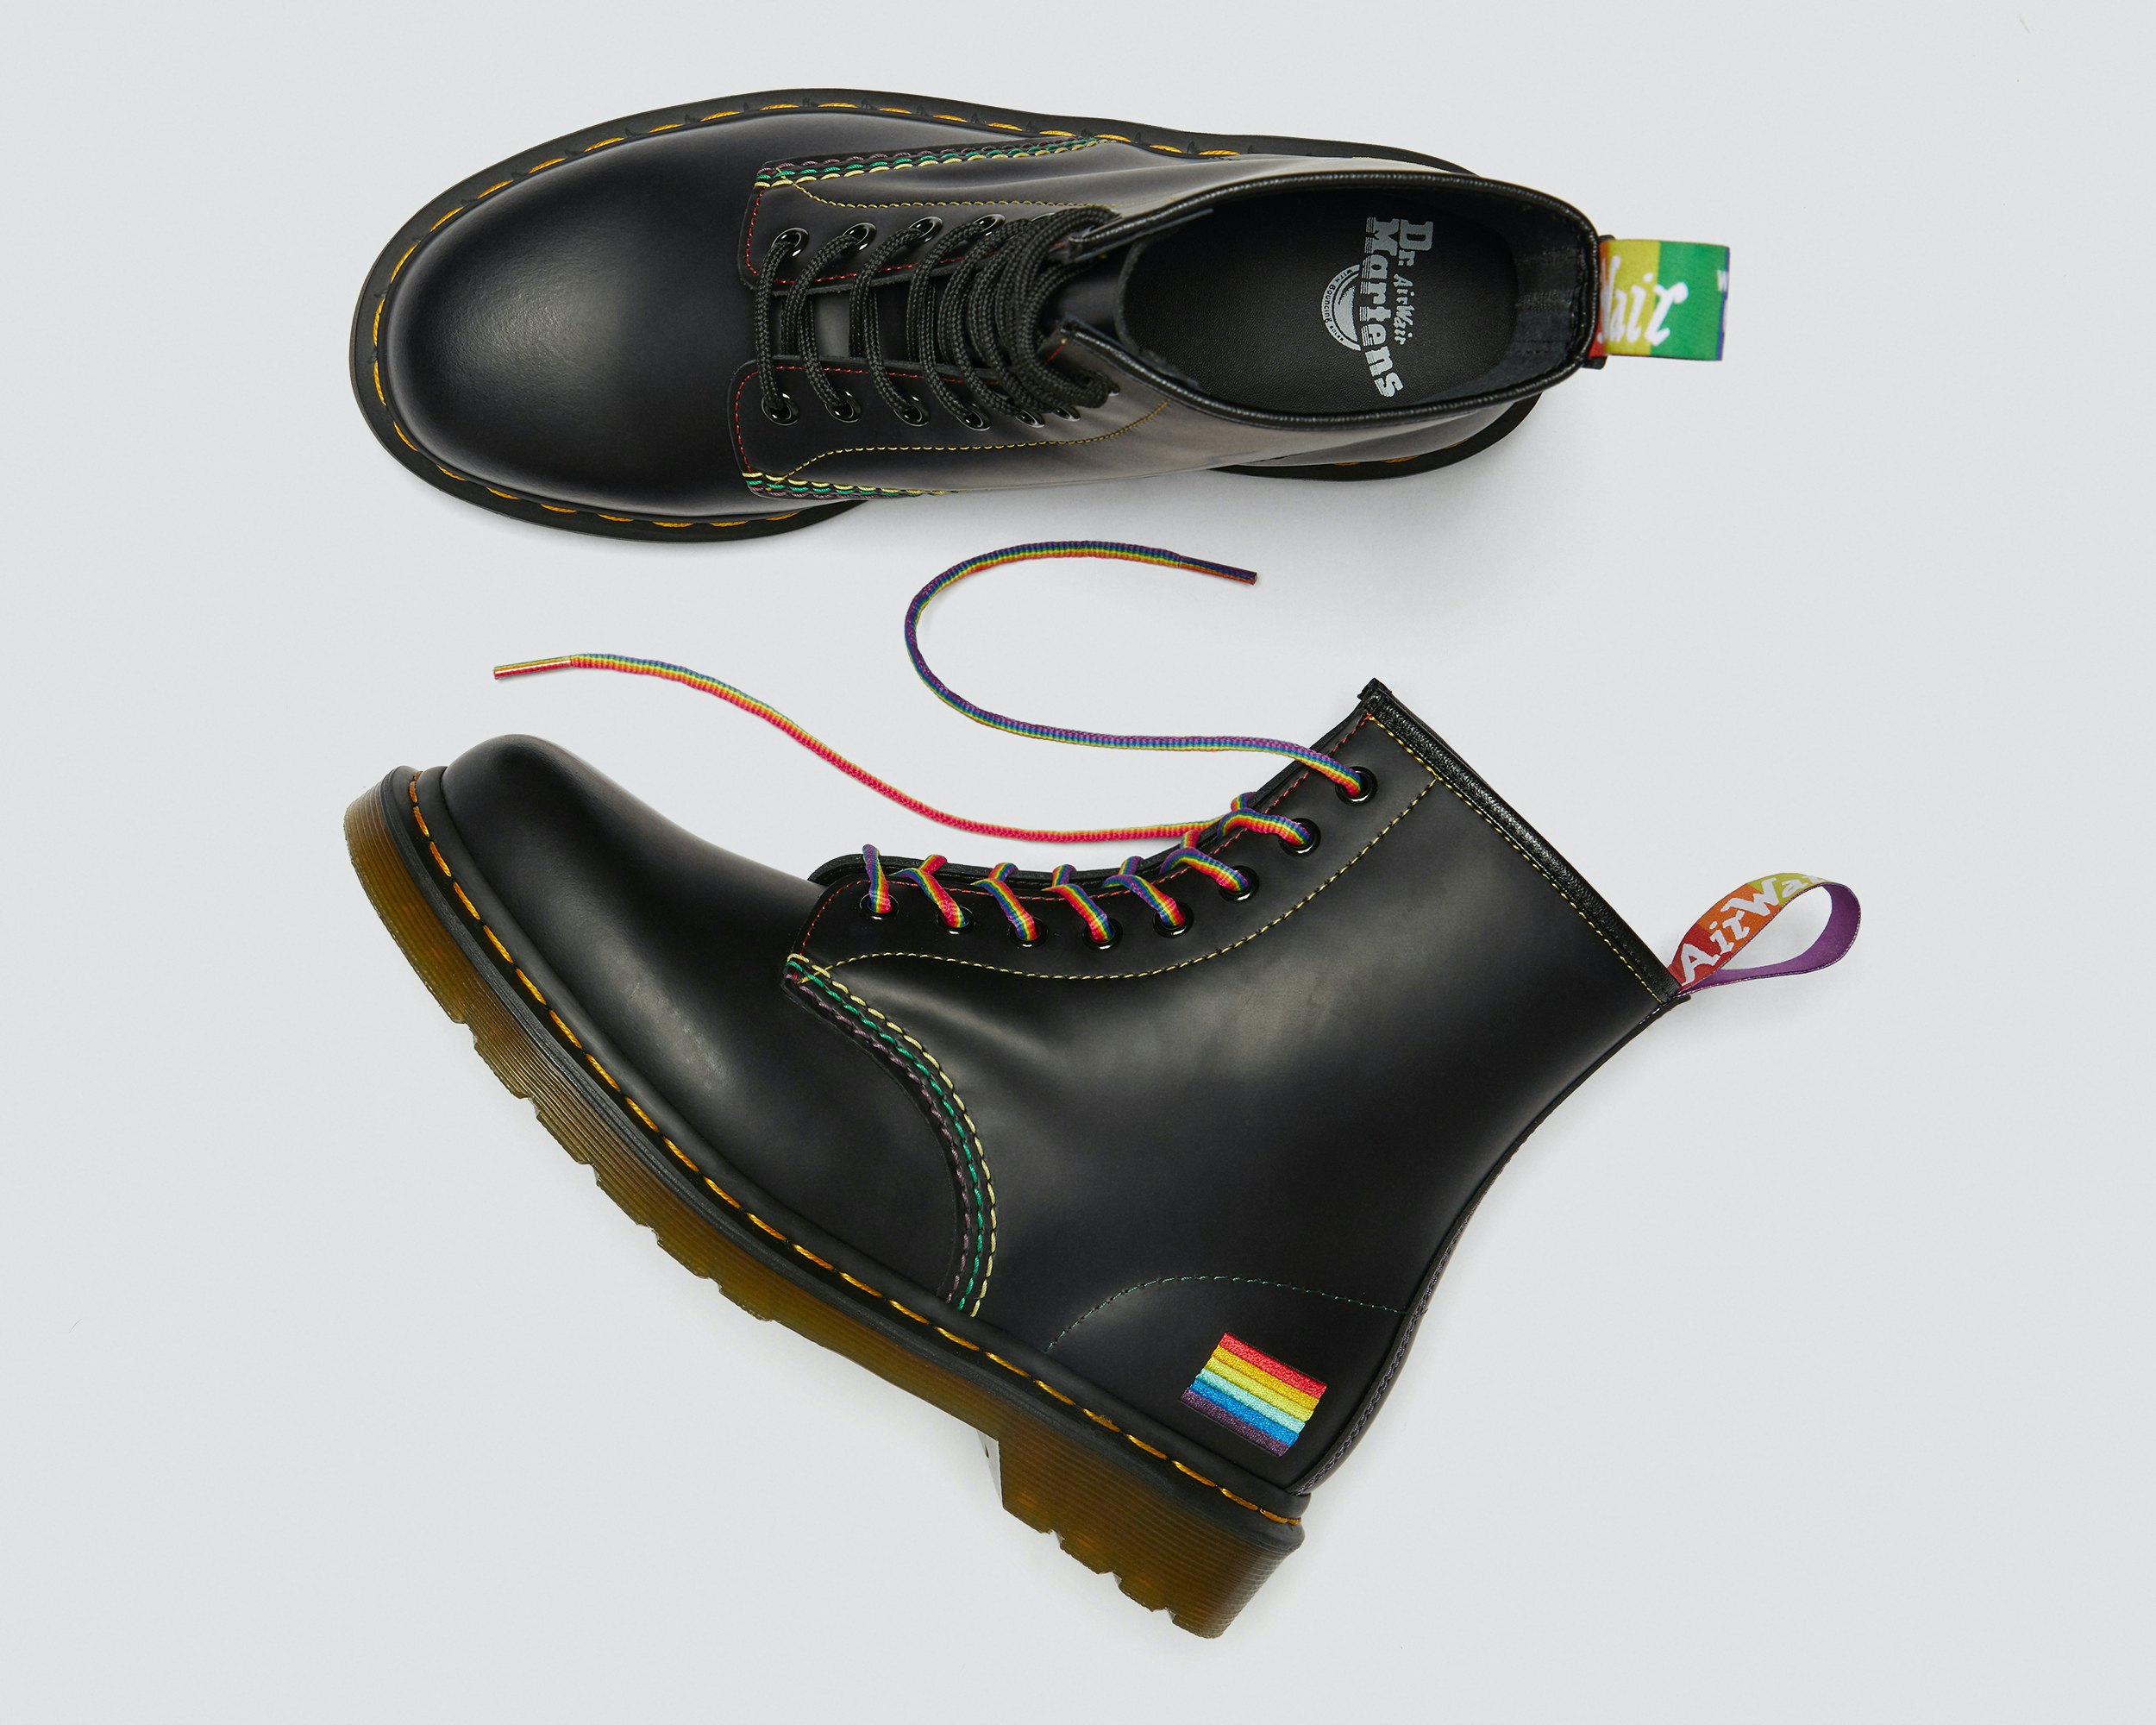 Dr. Martens' 2020 Pride Boot, Stitched 